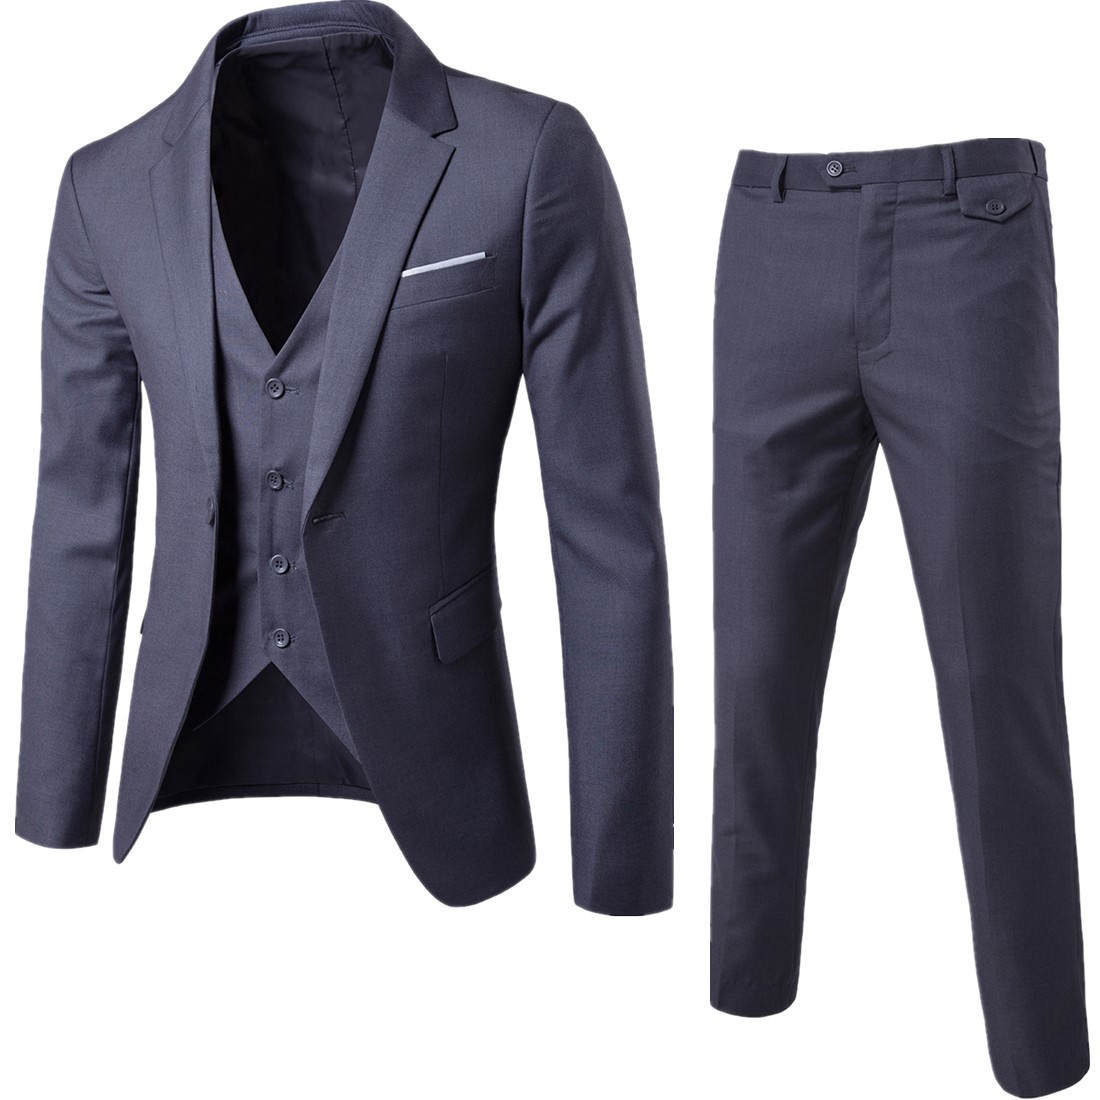 A new business casual men's suit suit for men in spring 2020